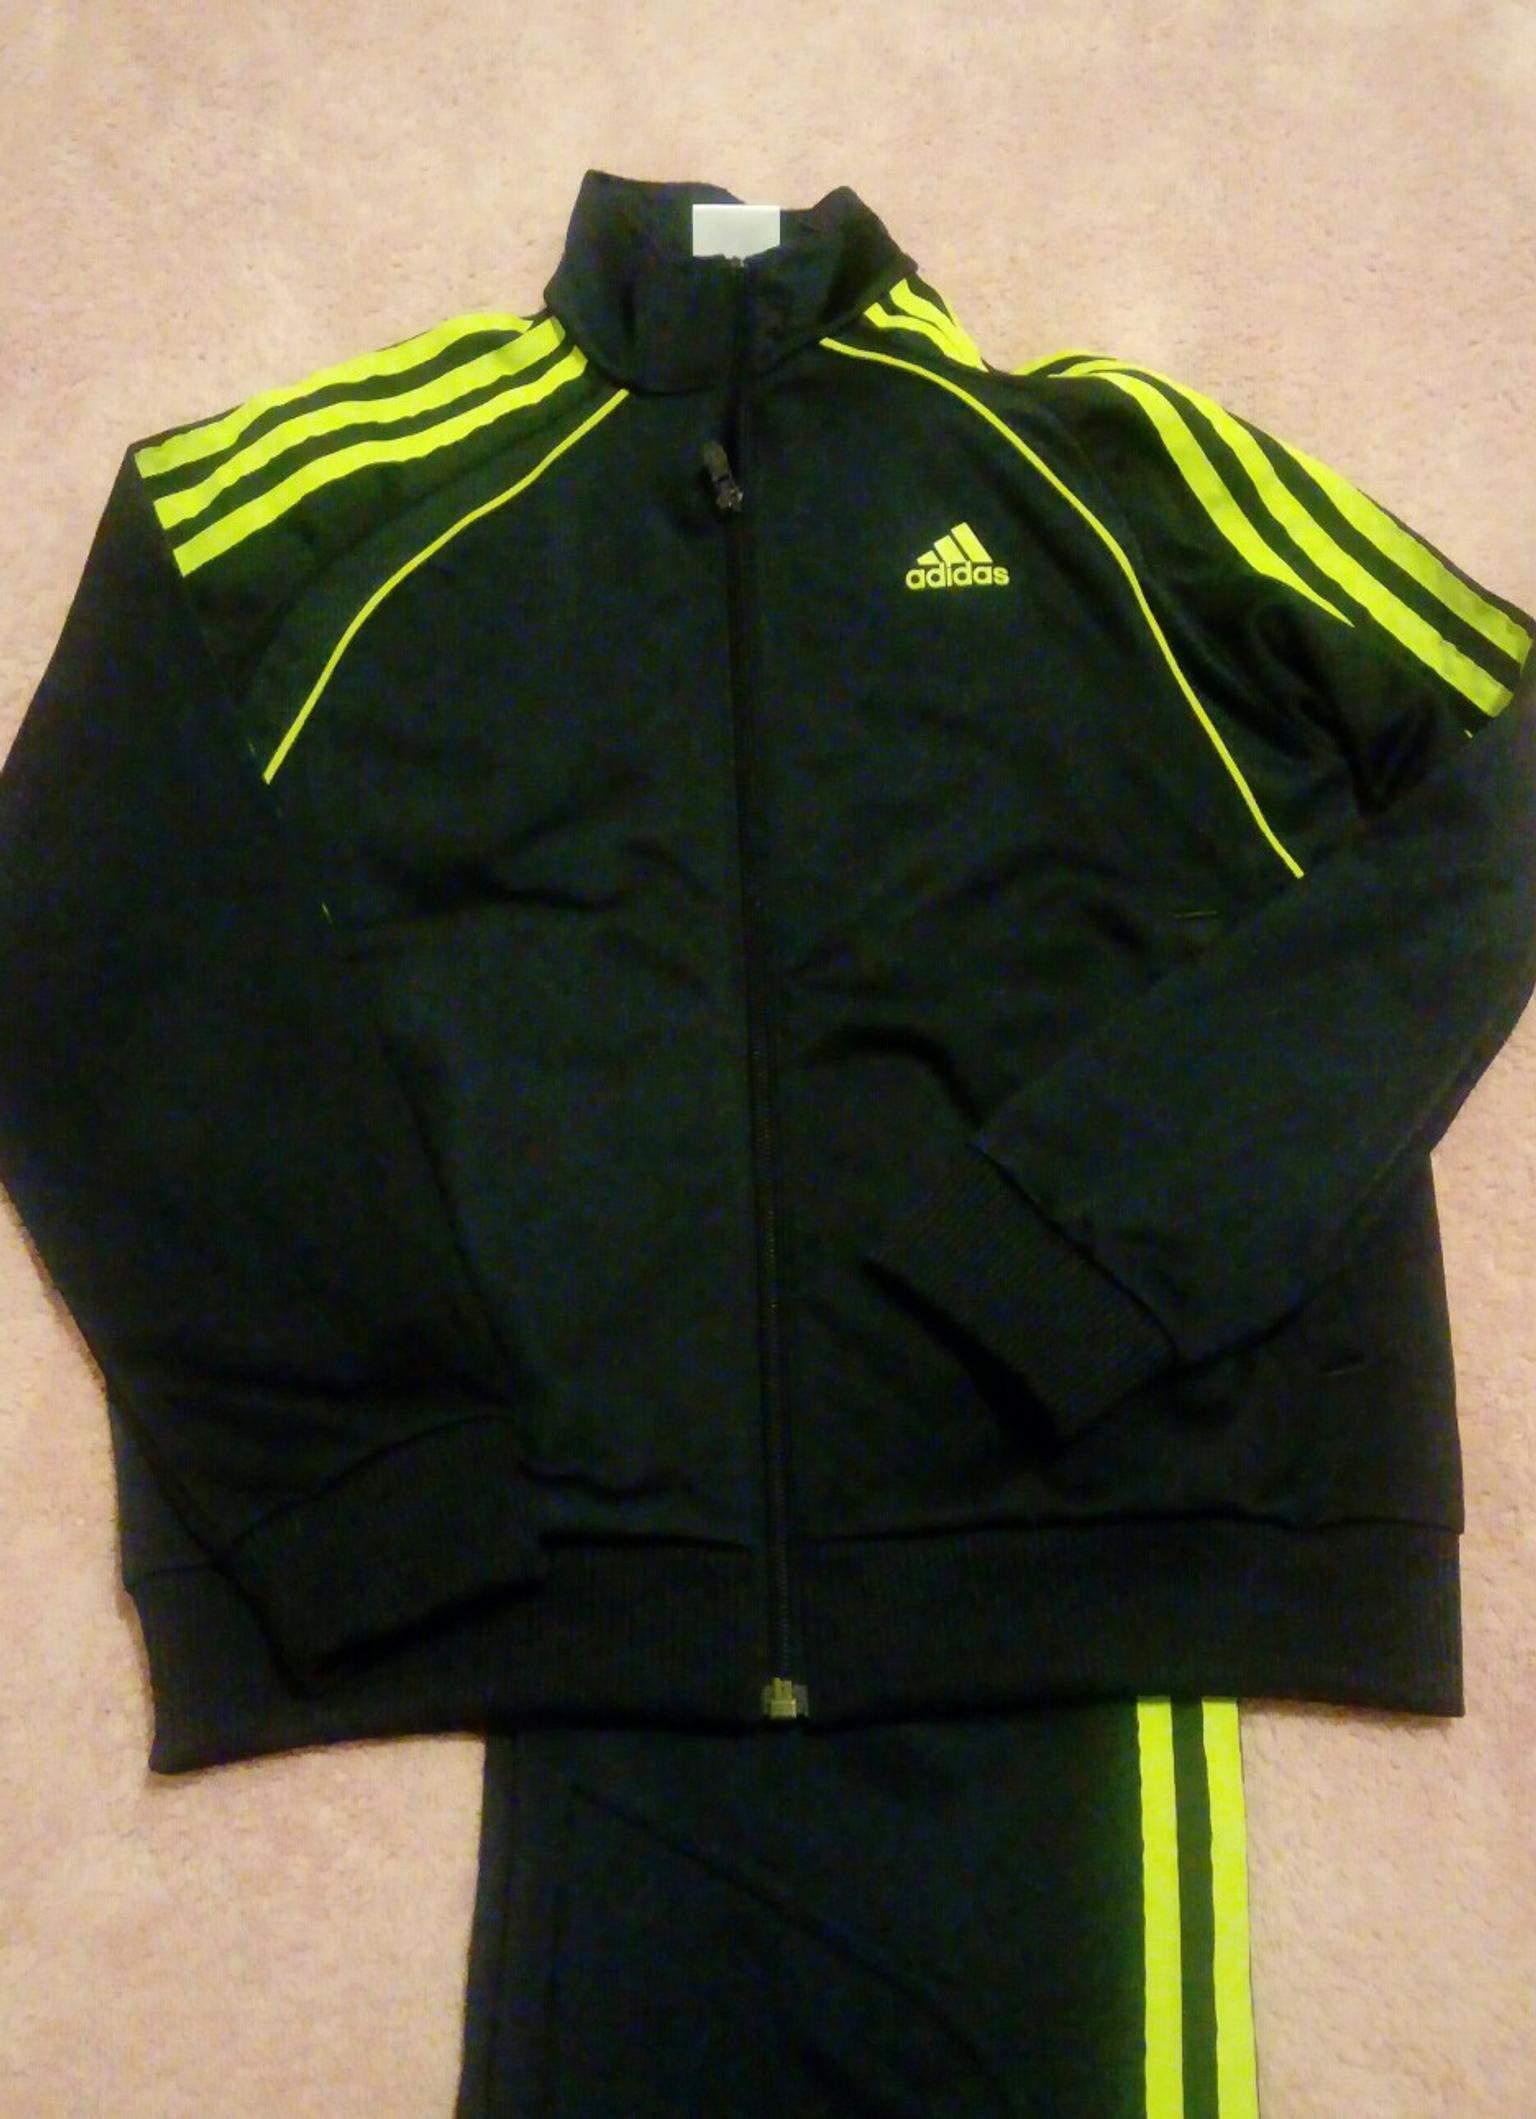 giacca adidas fluo - OFF67% - pect.se!